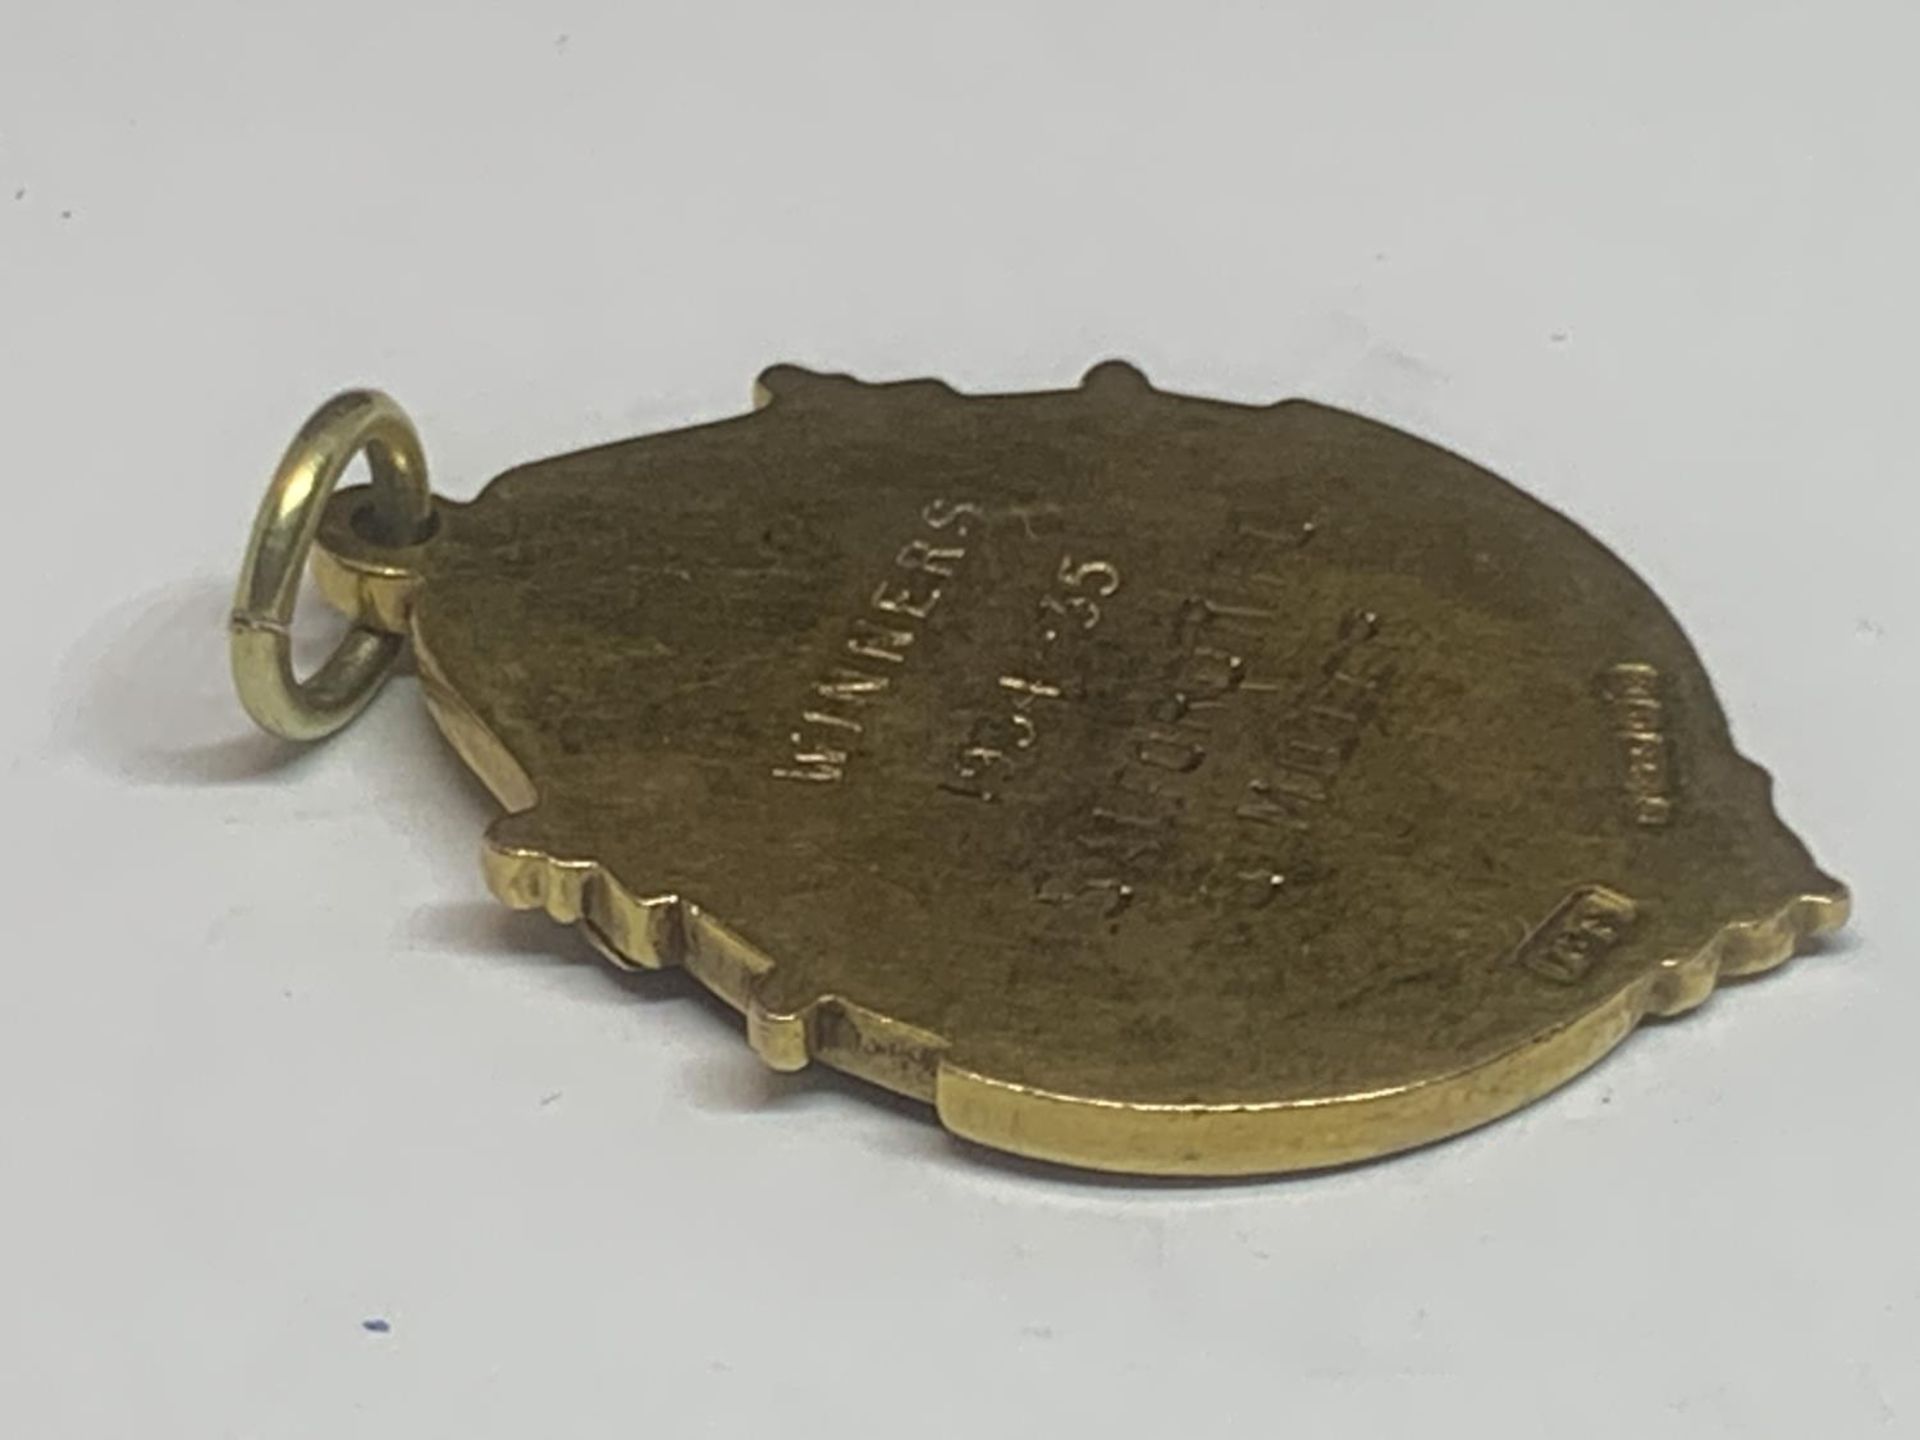 A HALLMARKED 9 CARAT GOLD LANCASHIRE RUGBY LEAGUE MEDAL ENGRAVED WINNERS 1934-35 SALFORD R.F.C S. - Image 5 of 6